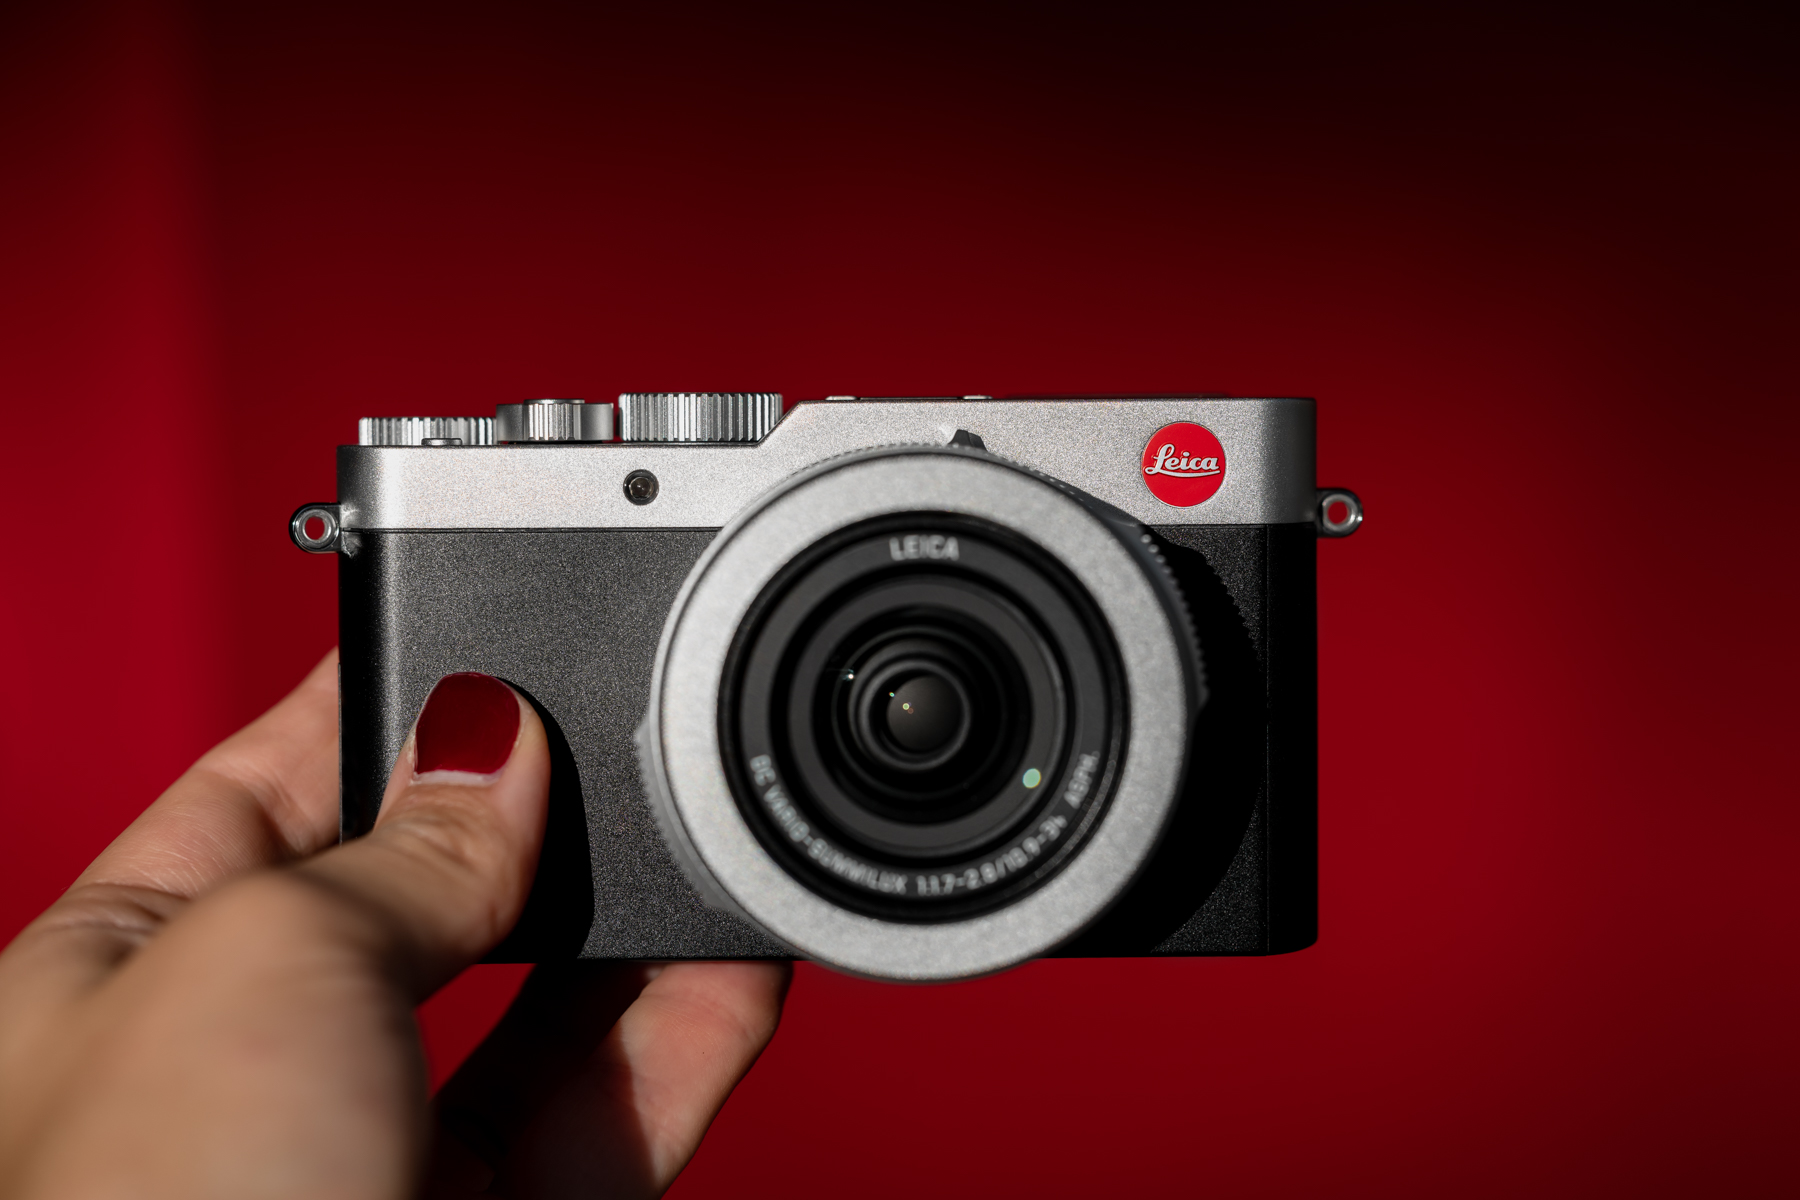 The Leica D-Lux 7 - Compact and powerful 